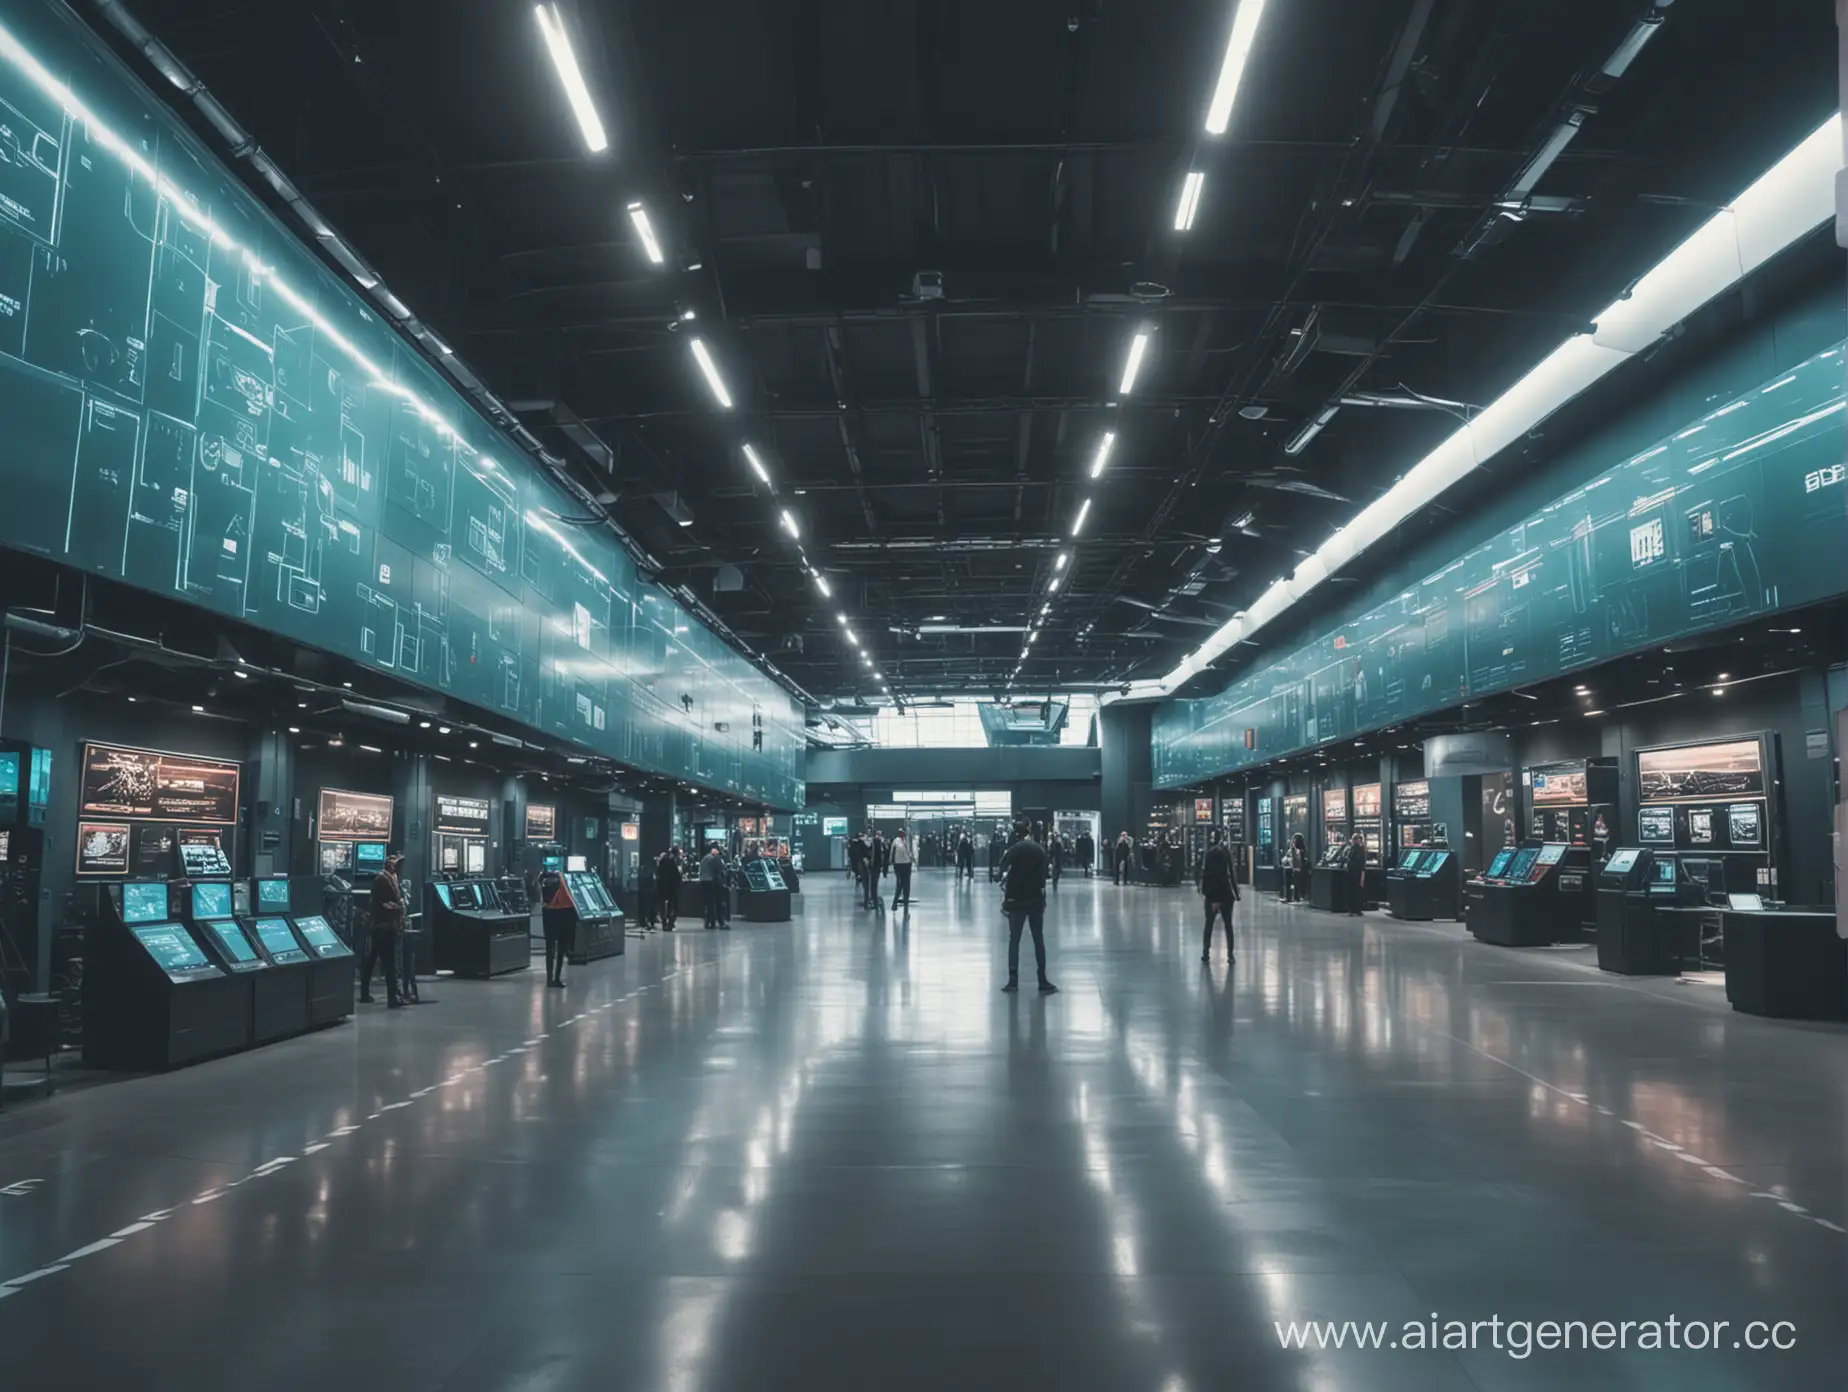 hitech museum, wide-angle shot, cool-toned color grading, sci-fi